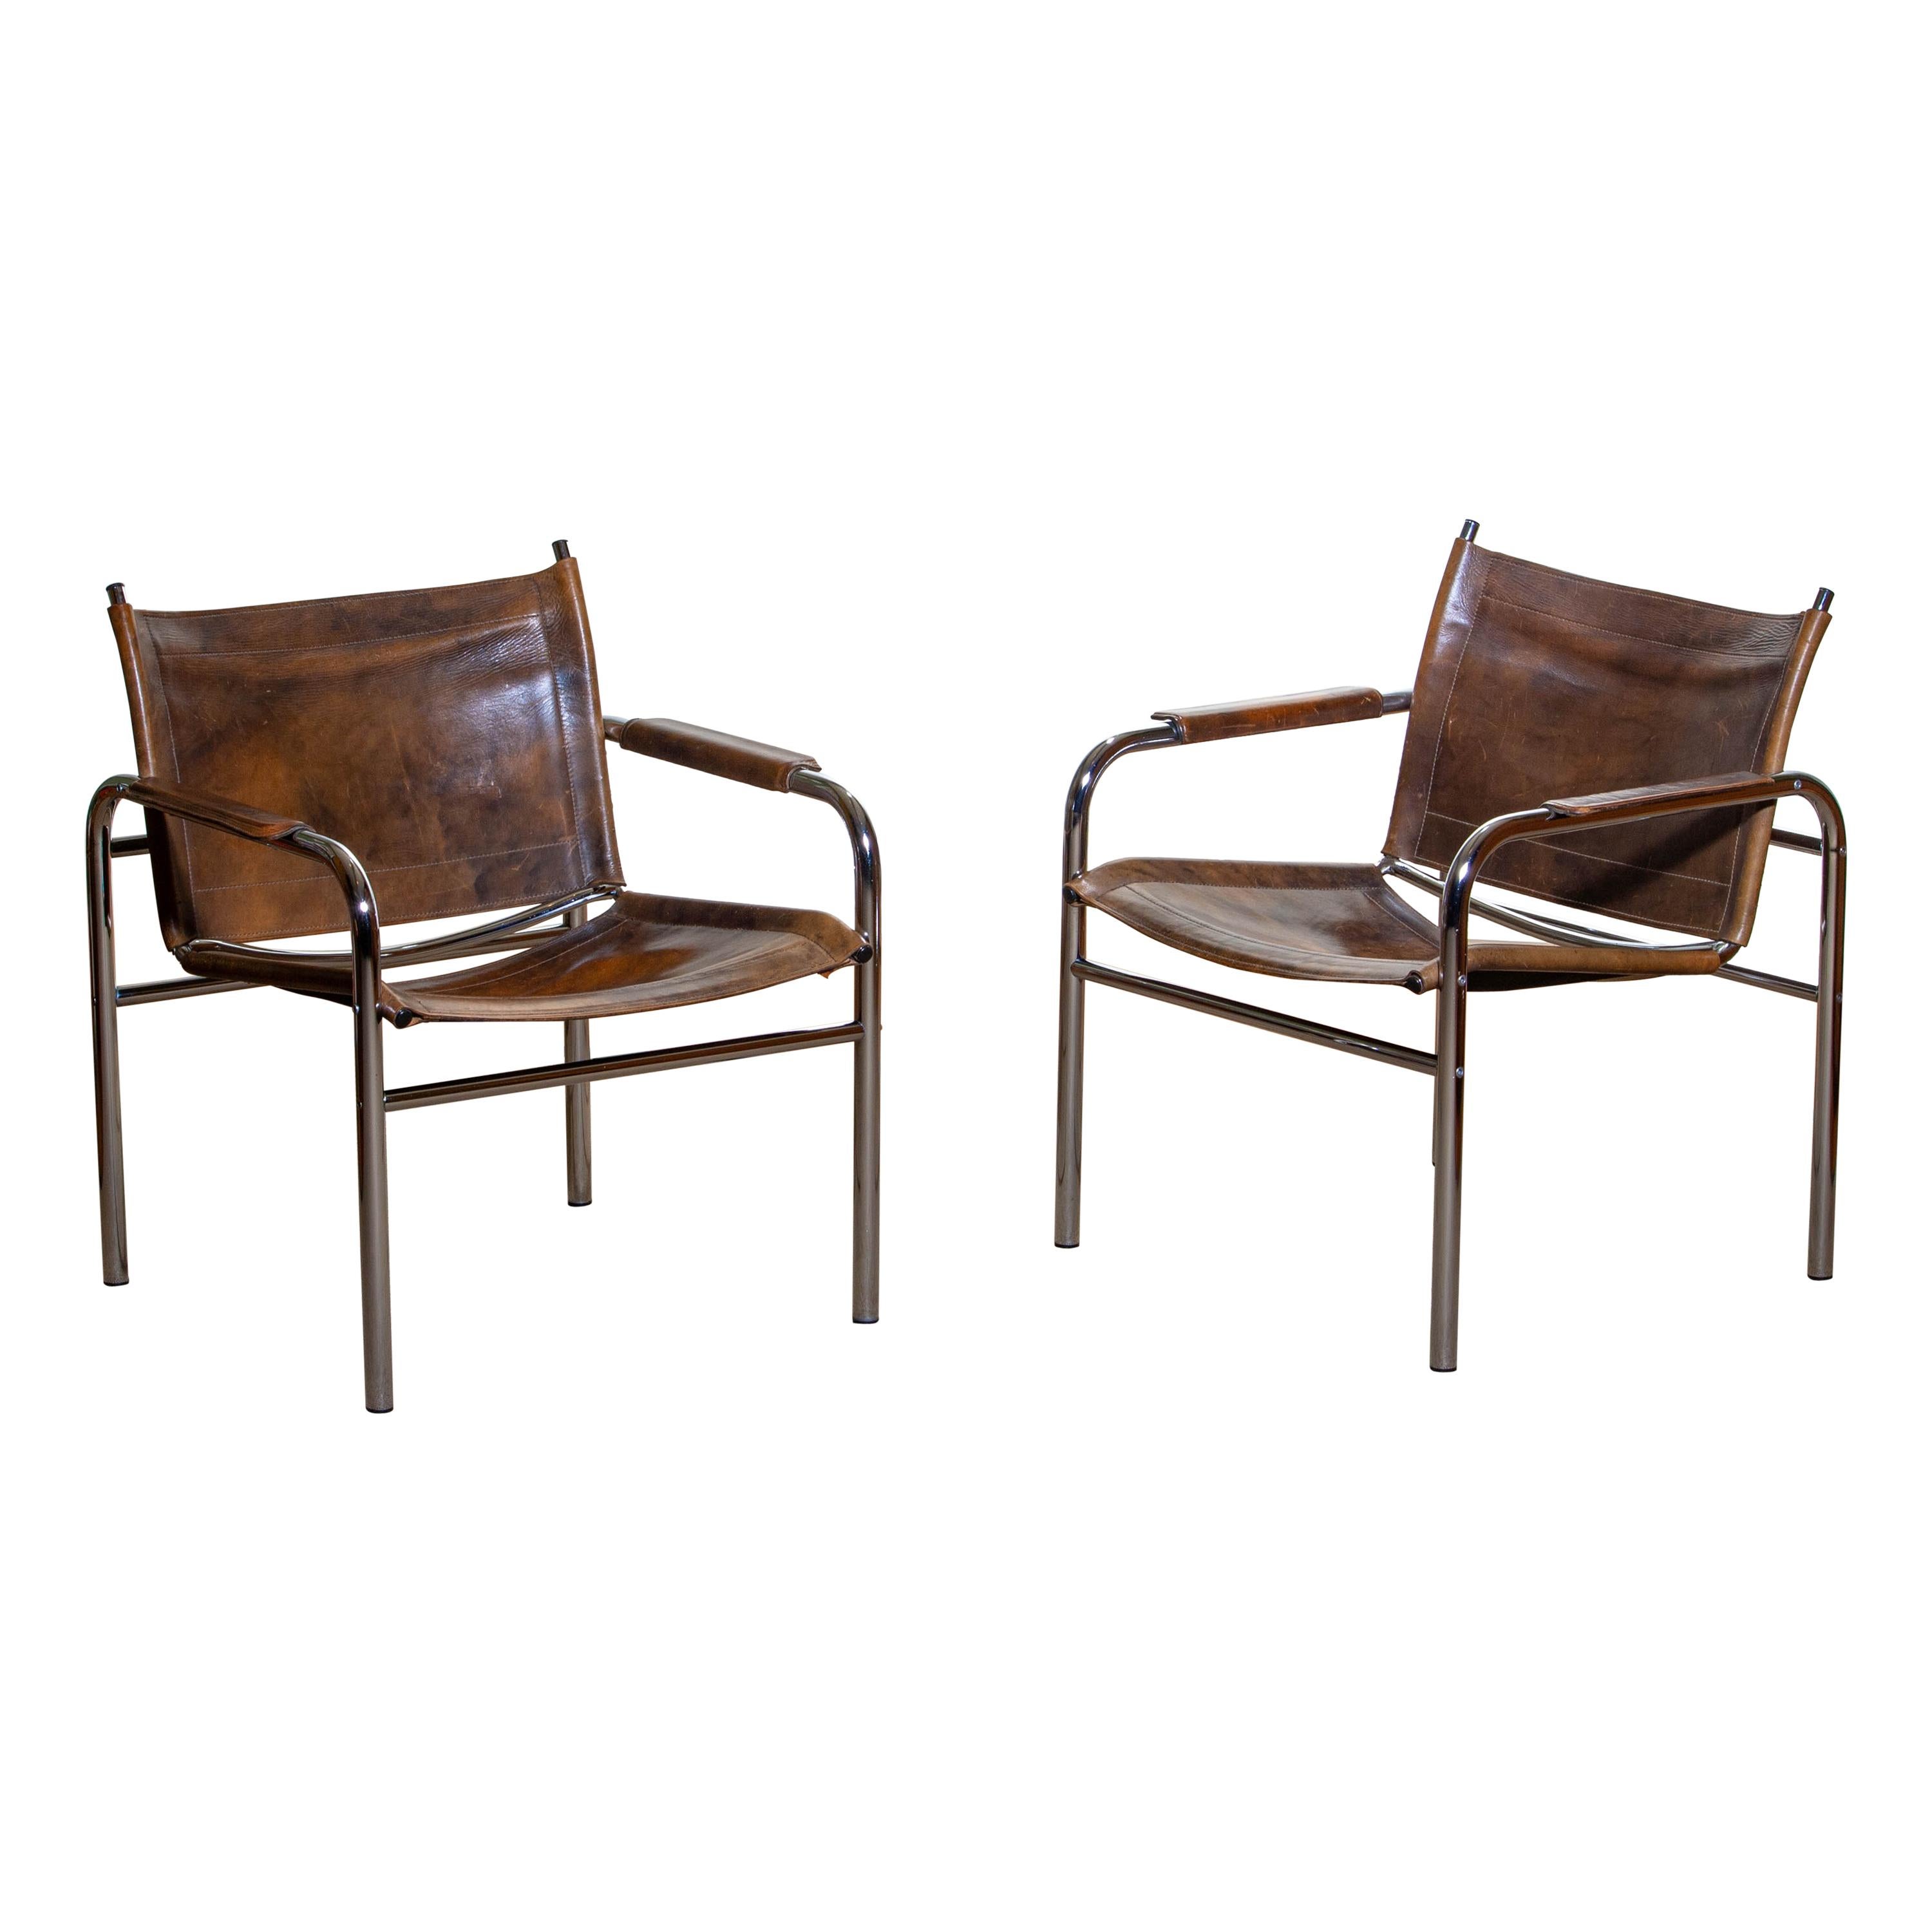 1980s, Pair of Leather and Tubular Steel Armchairs by Tord Bjorklund, Sweden 9